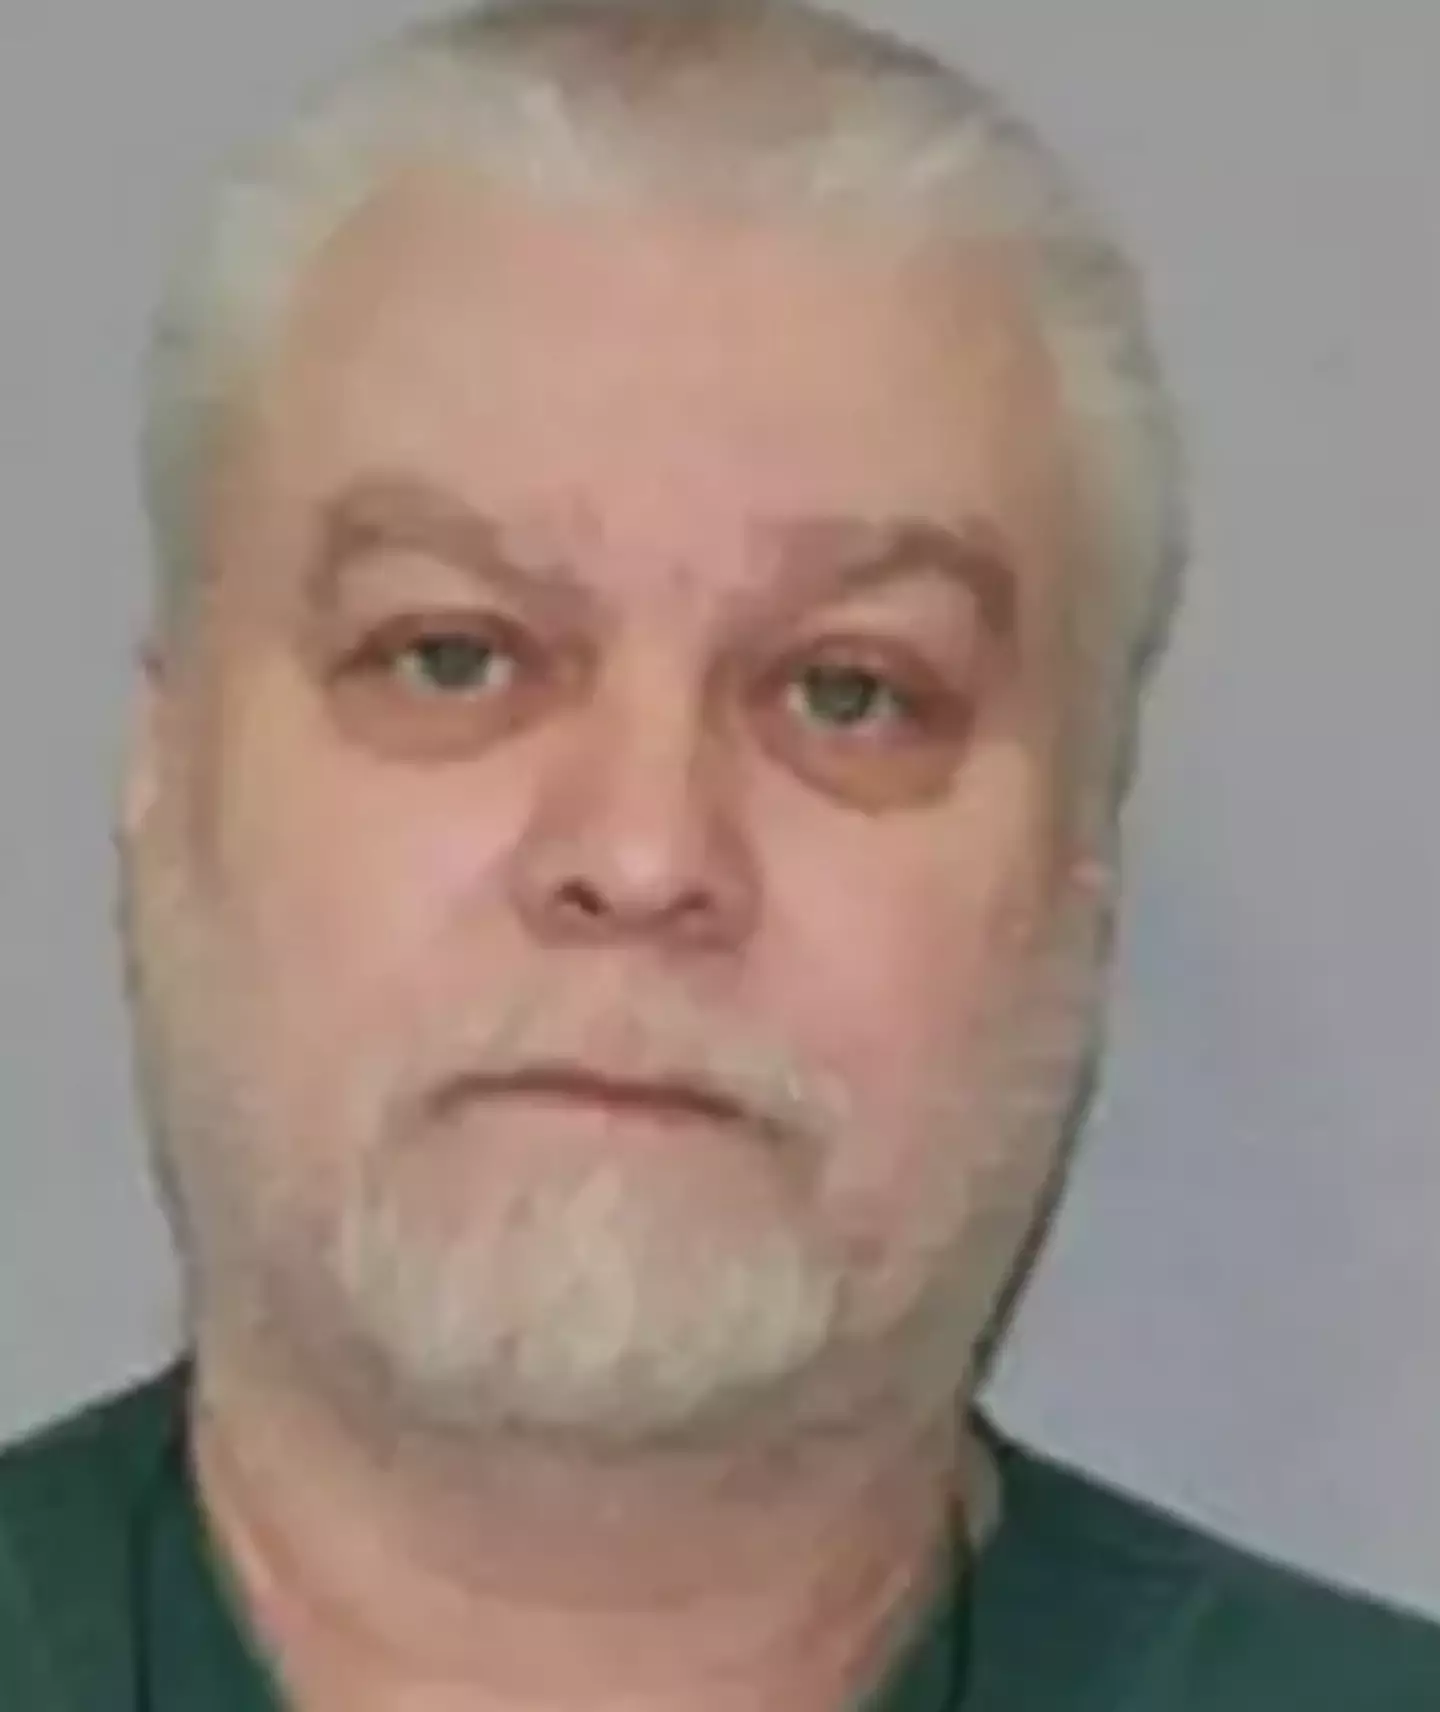 Steven Avery's trials and convictions are explored in Netflix's Making a Murderer.